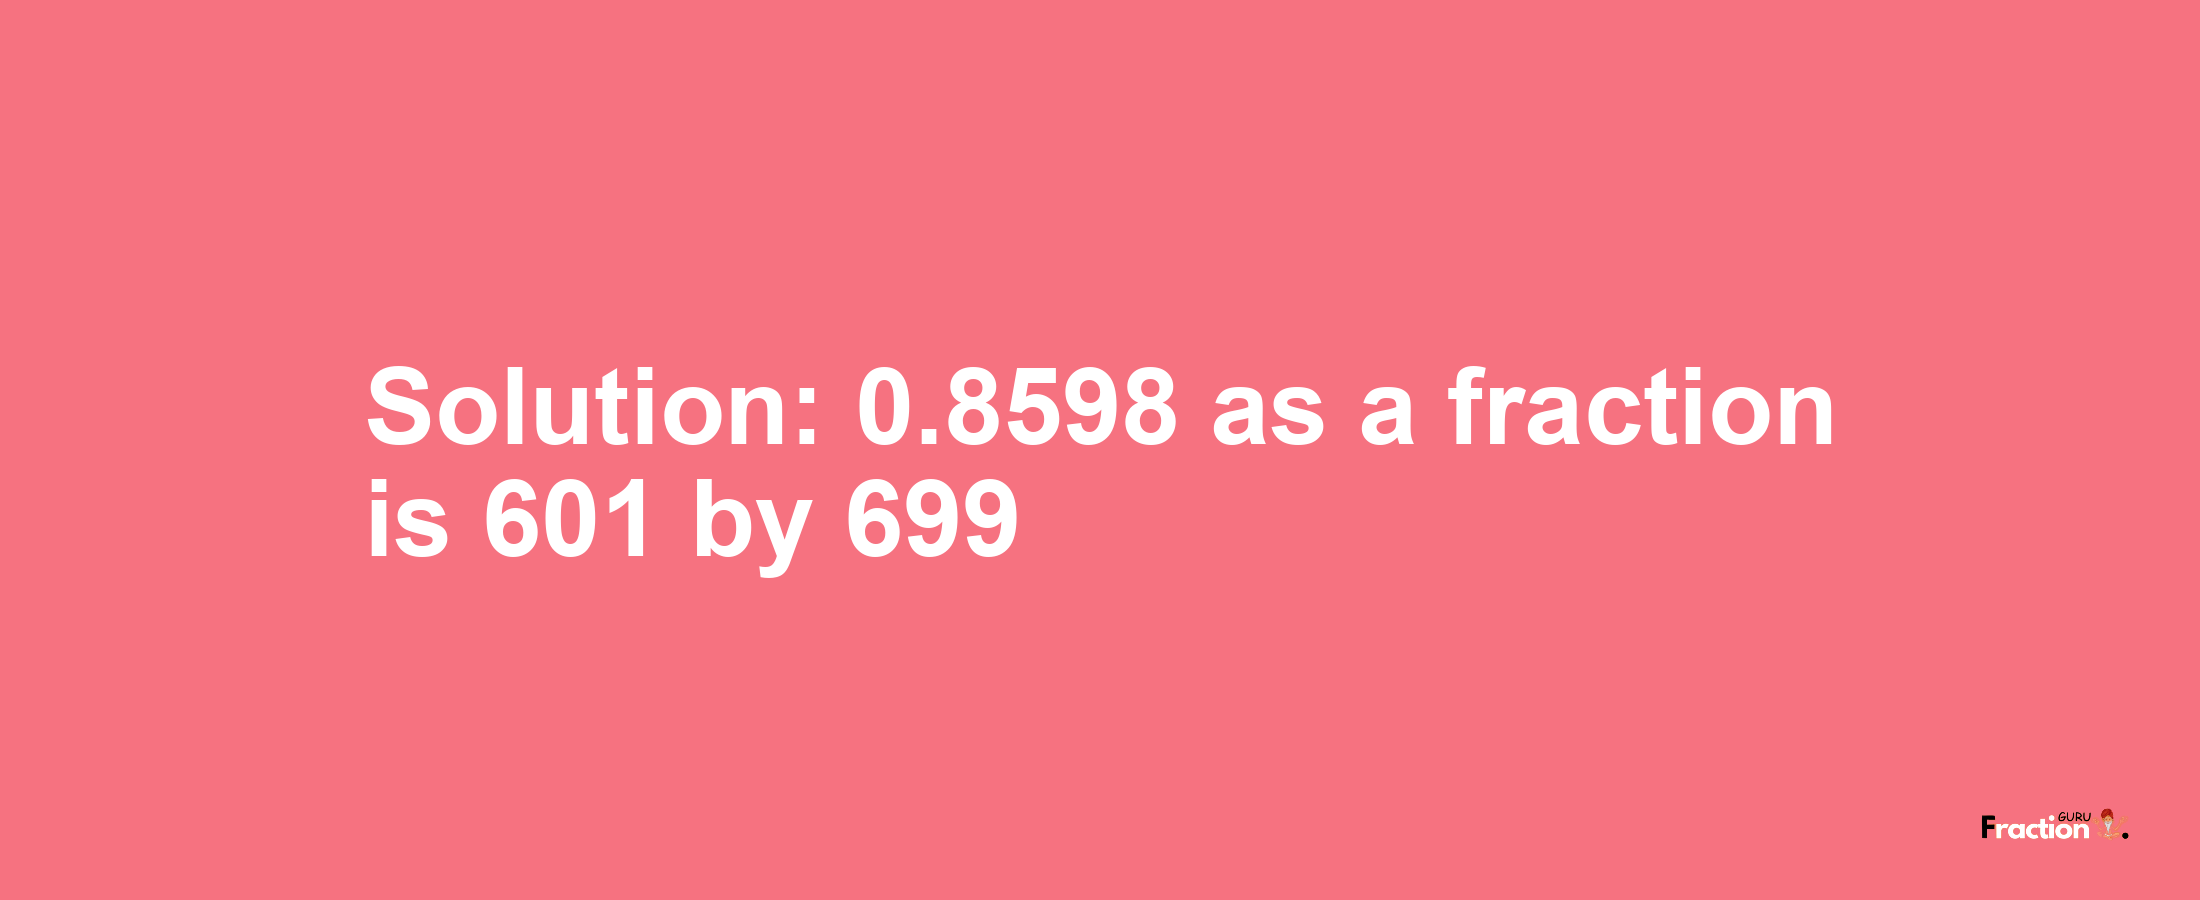 Solution:0.8598 as a fraction is 601/699